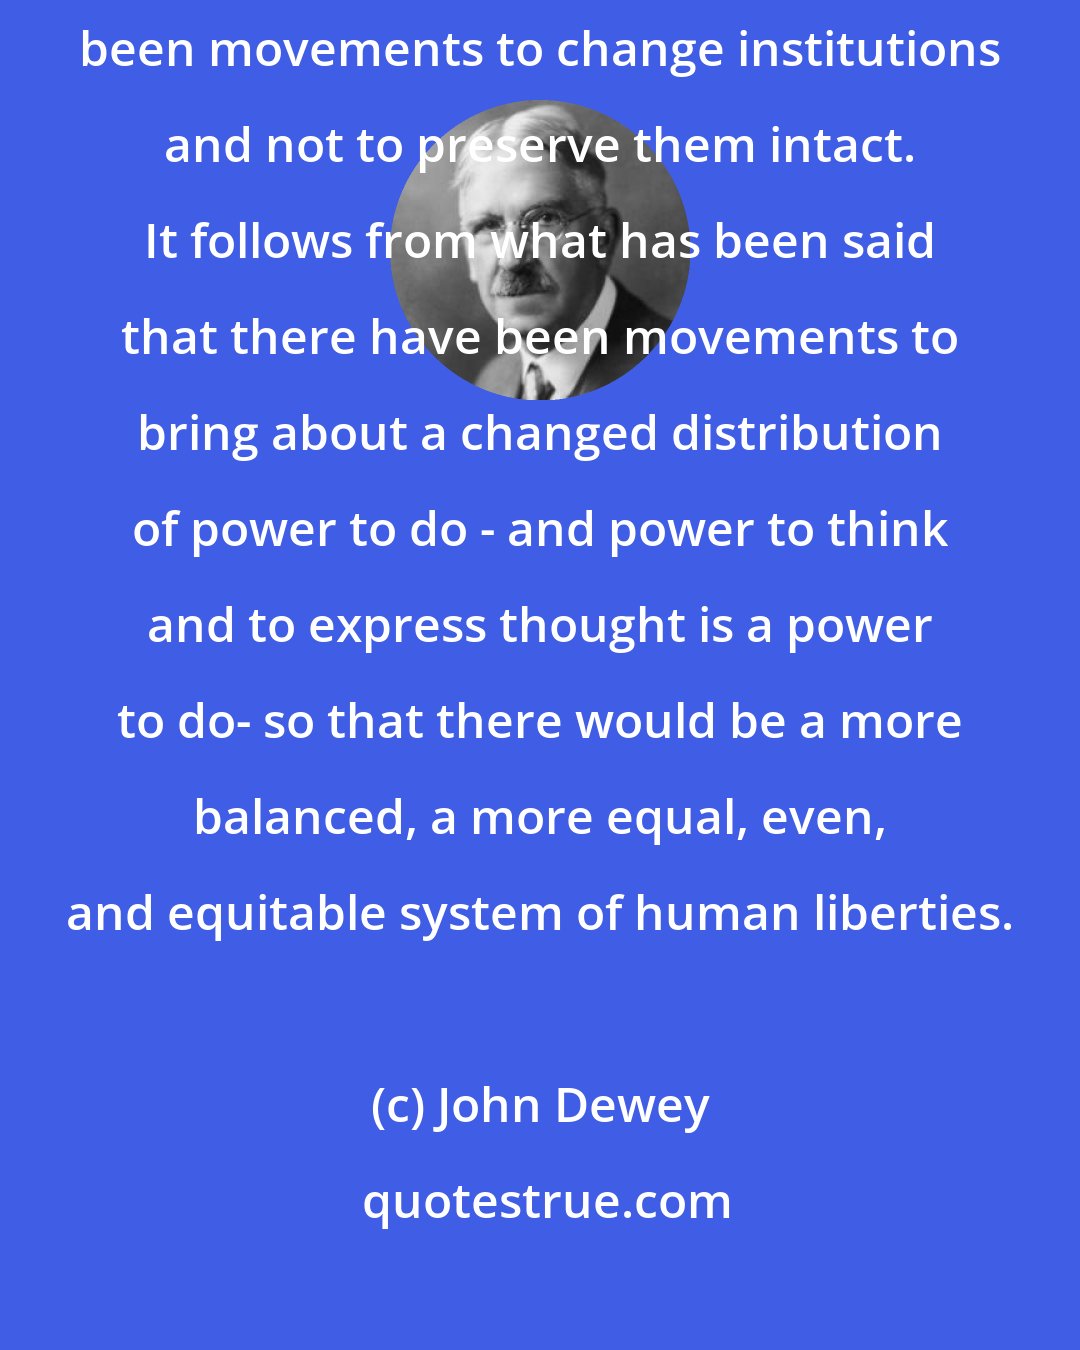 John Dewey: Historically the great movements for human liberation have always been movements to change institutions and not to preserve them intact. It follows from what has been said that there have been movements to bring about a changed distribution of power to do - and power to think and to express thought is a power to do- so that there would be a more balanced, a more equal, even, and equitable system of human liberties.